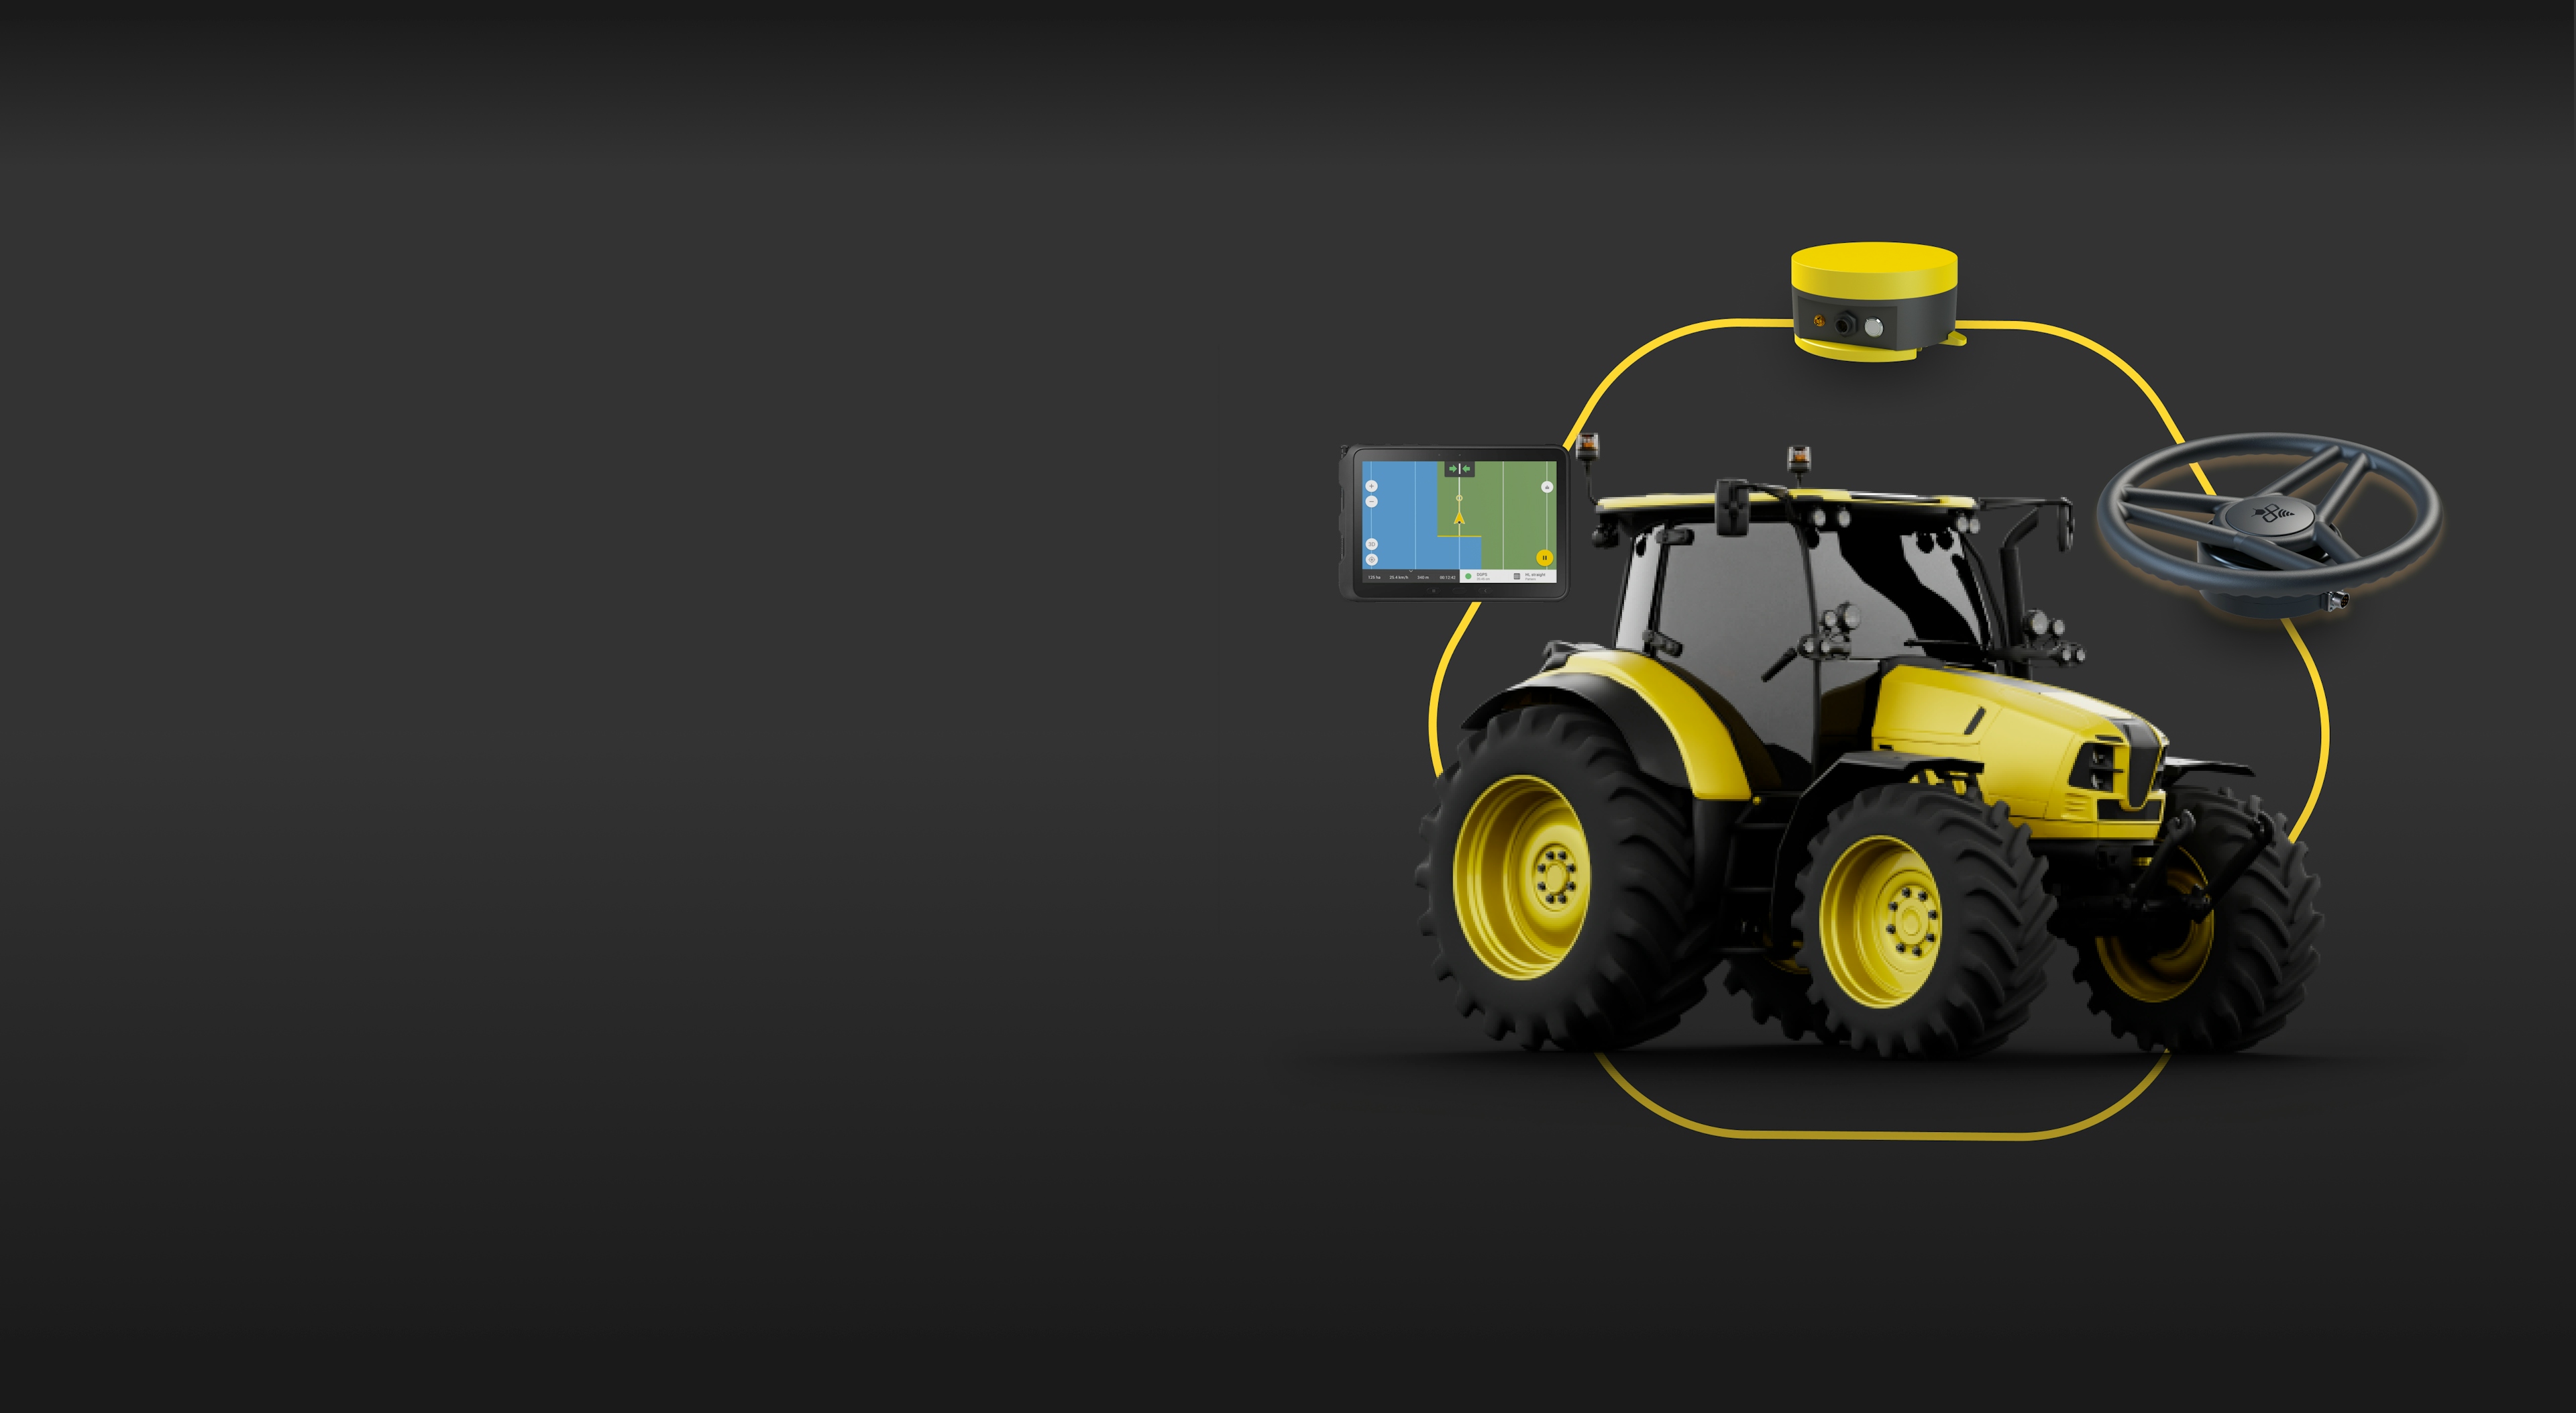 A simple and affordable tractor GPS navigation and autosteering system for your farm